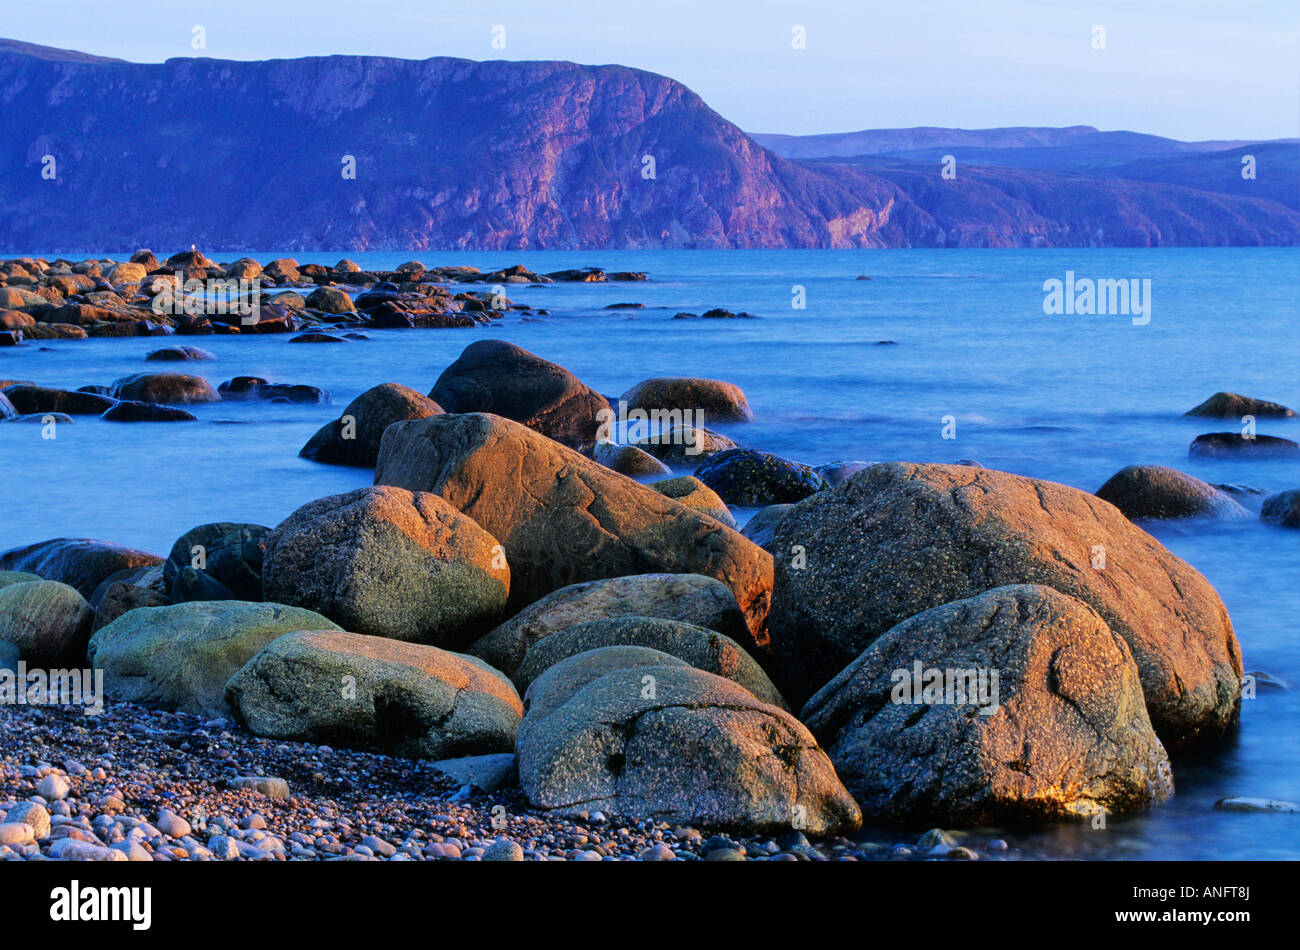 Rocks in evening light at Lobster Cove in Gros Morne National Park, Newfoundland, Canada Stock Photo